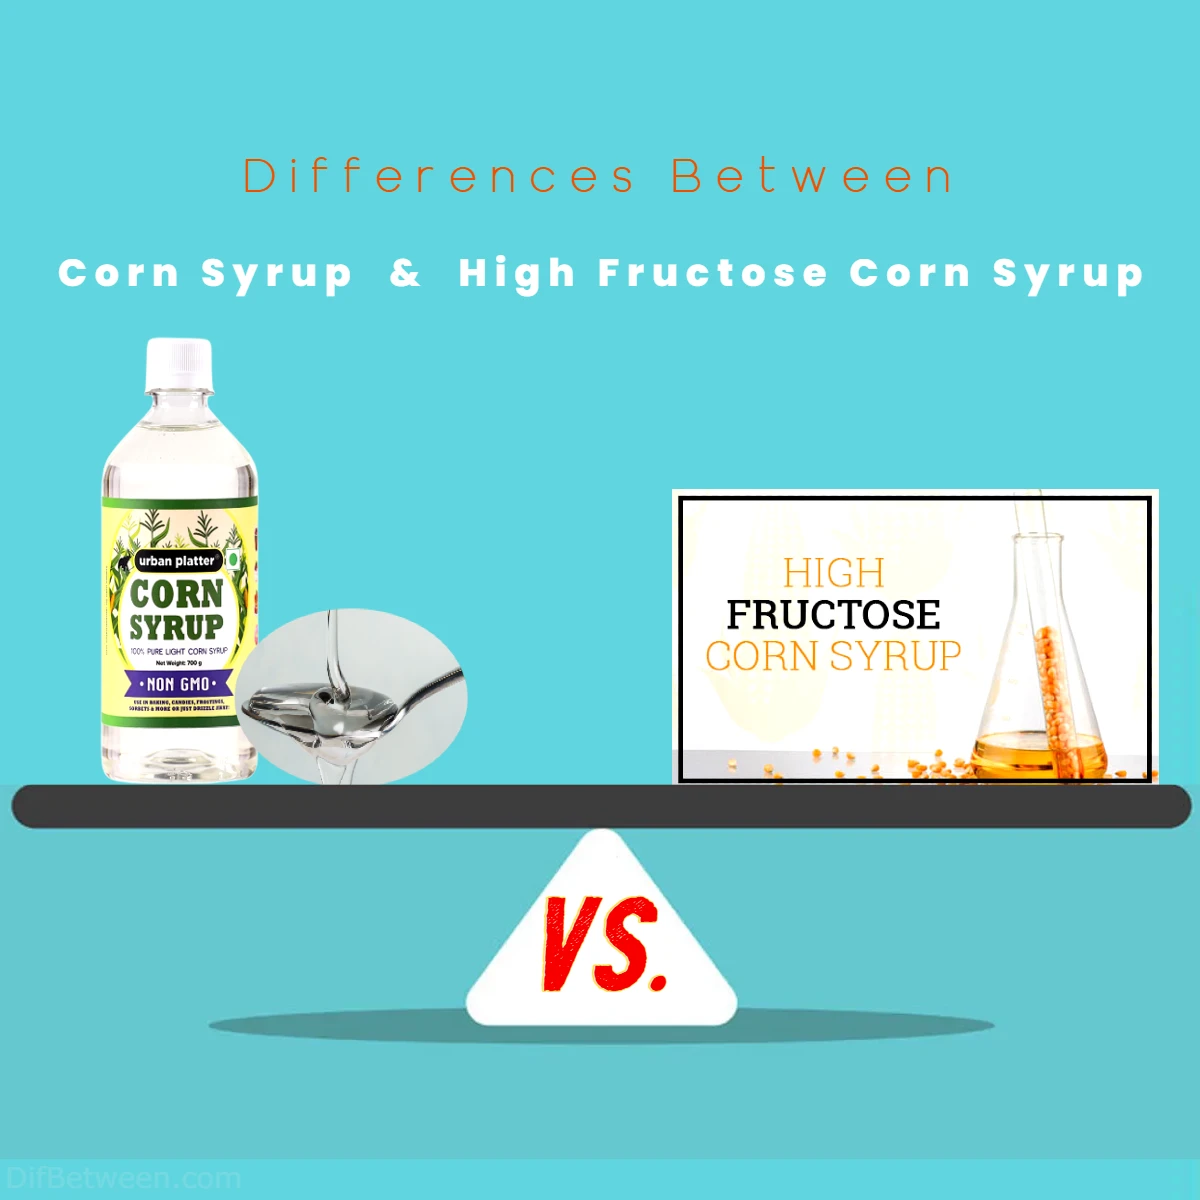 Differences Between Corn Syrup vs High Fructose Corn Syrup